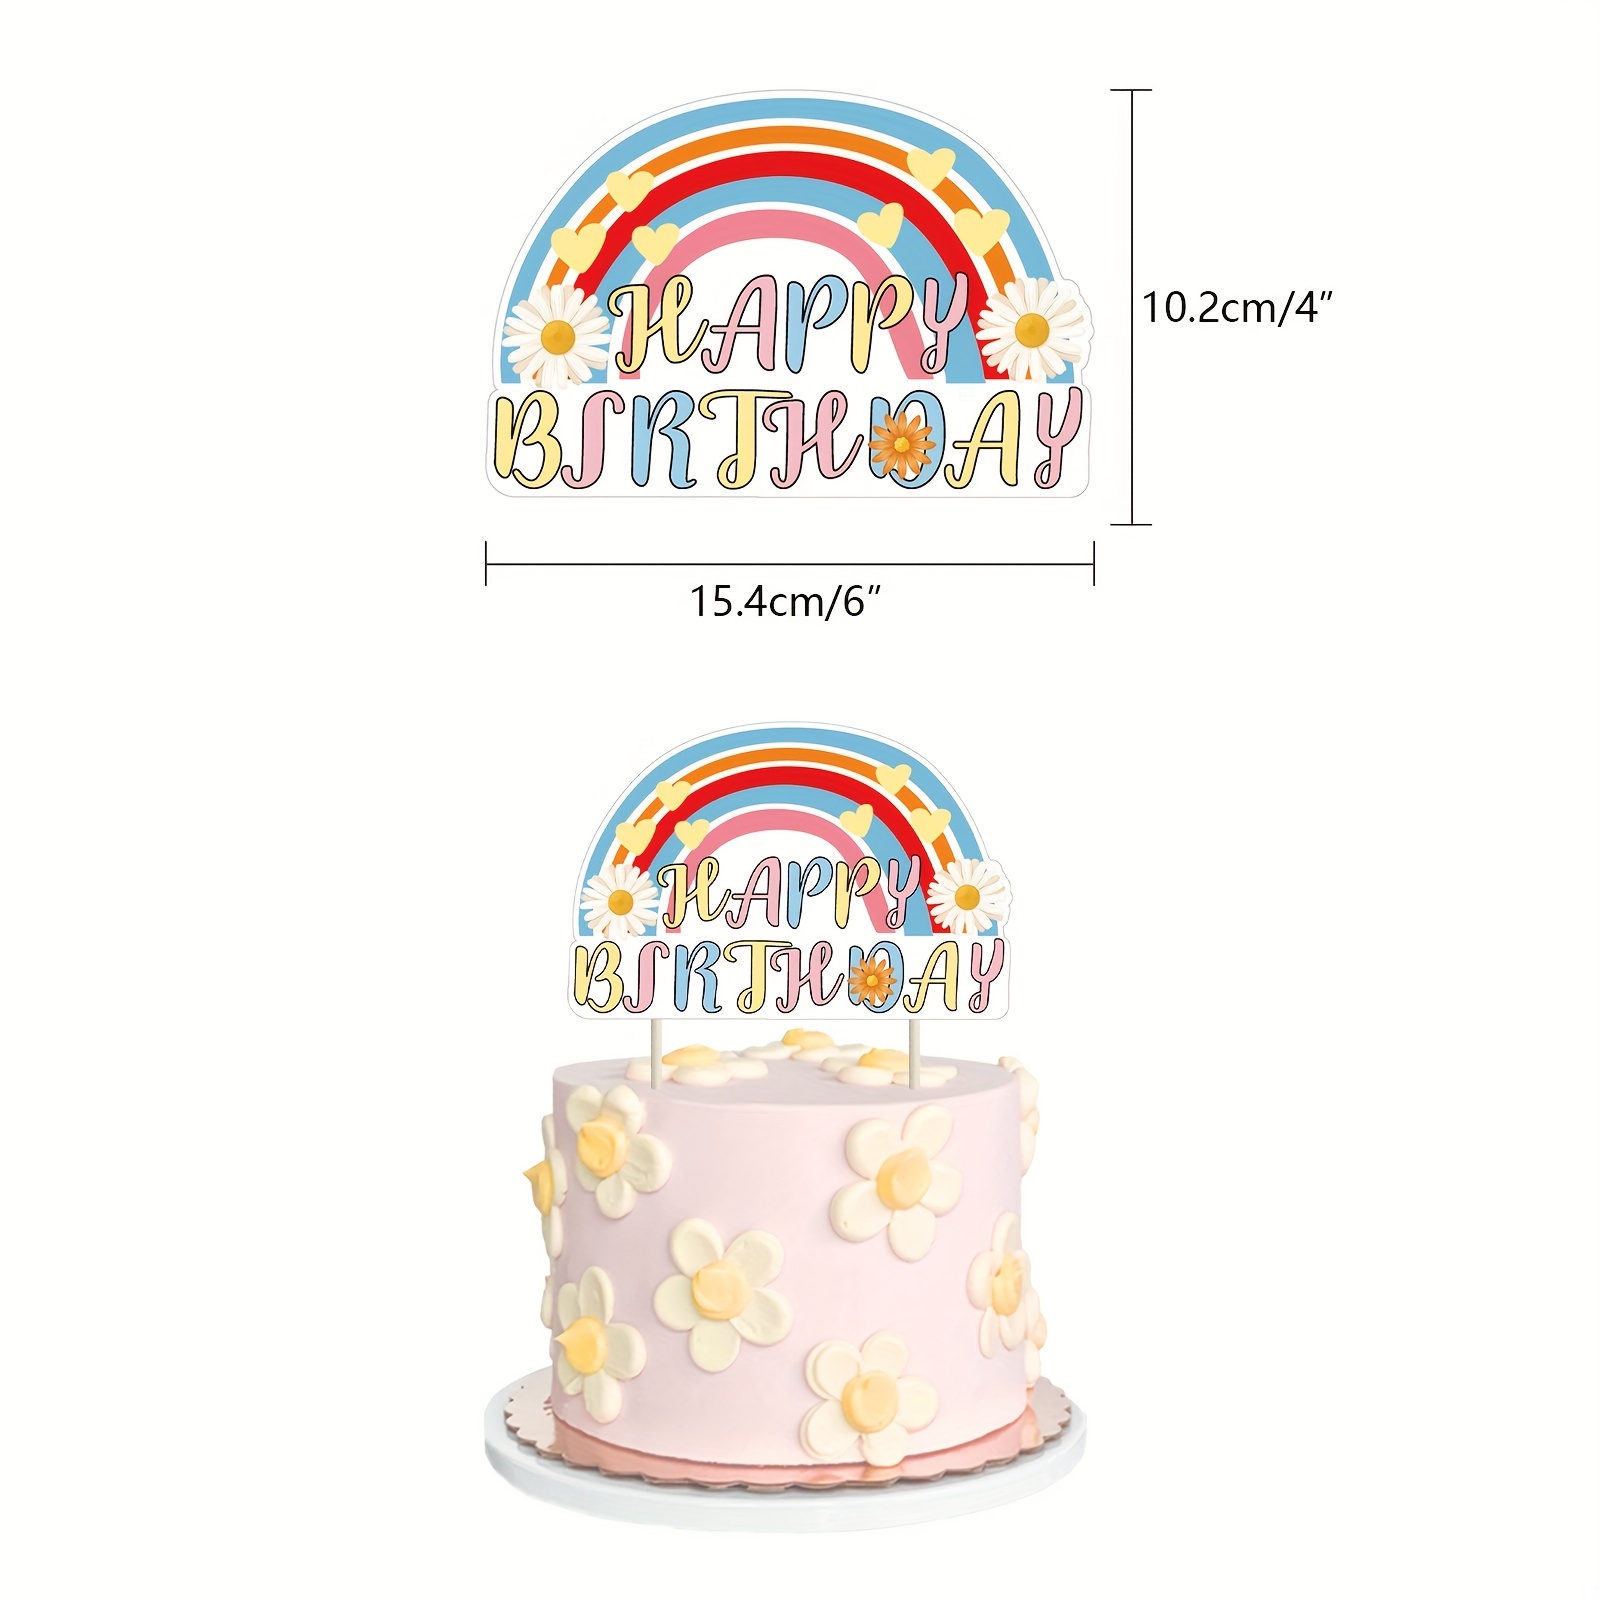 Rainbow Theme Party Decorations, 58 Pcs Rainbow Birthday Party Supplies  Include Happy Birthday Banner, Balloons, Hanging Decorations, Cake Cupcake